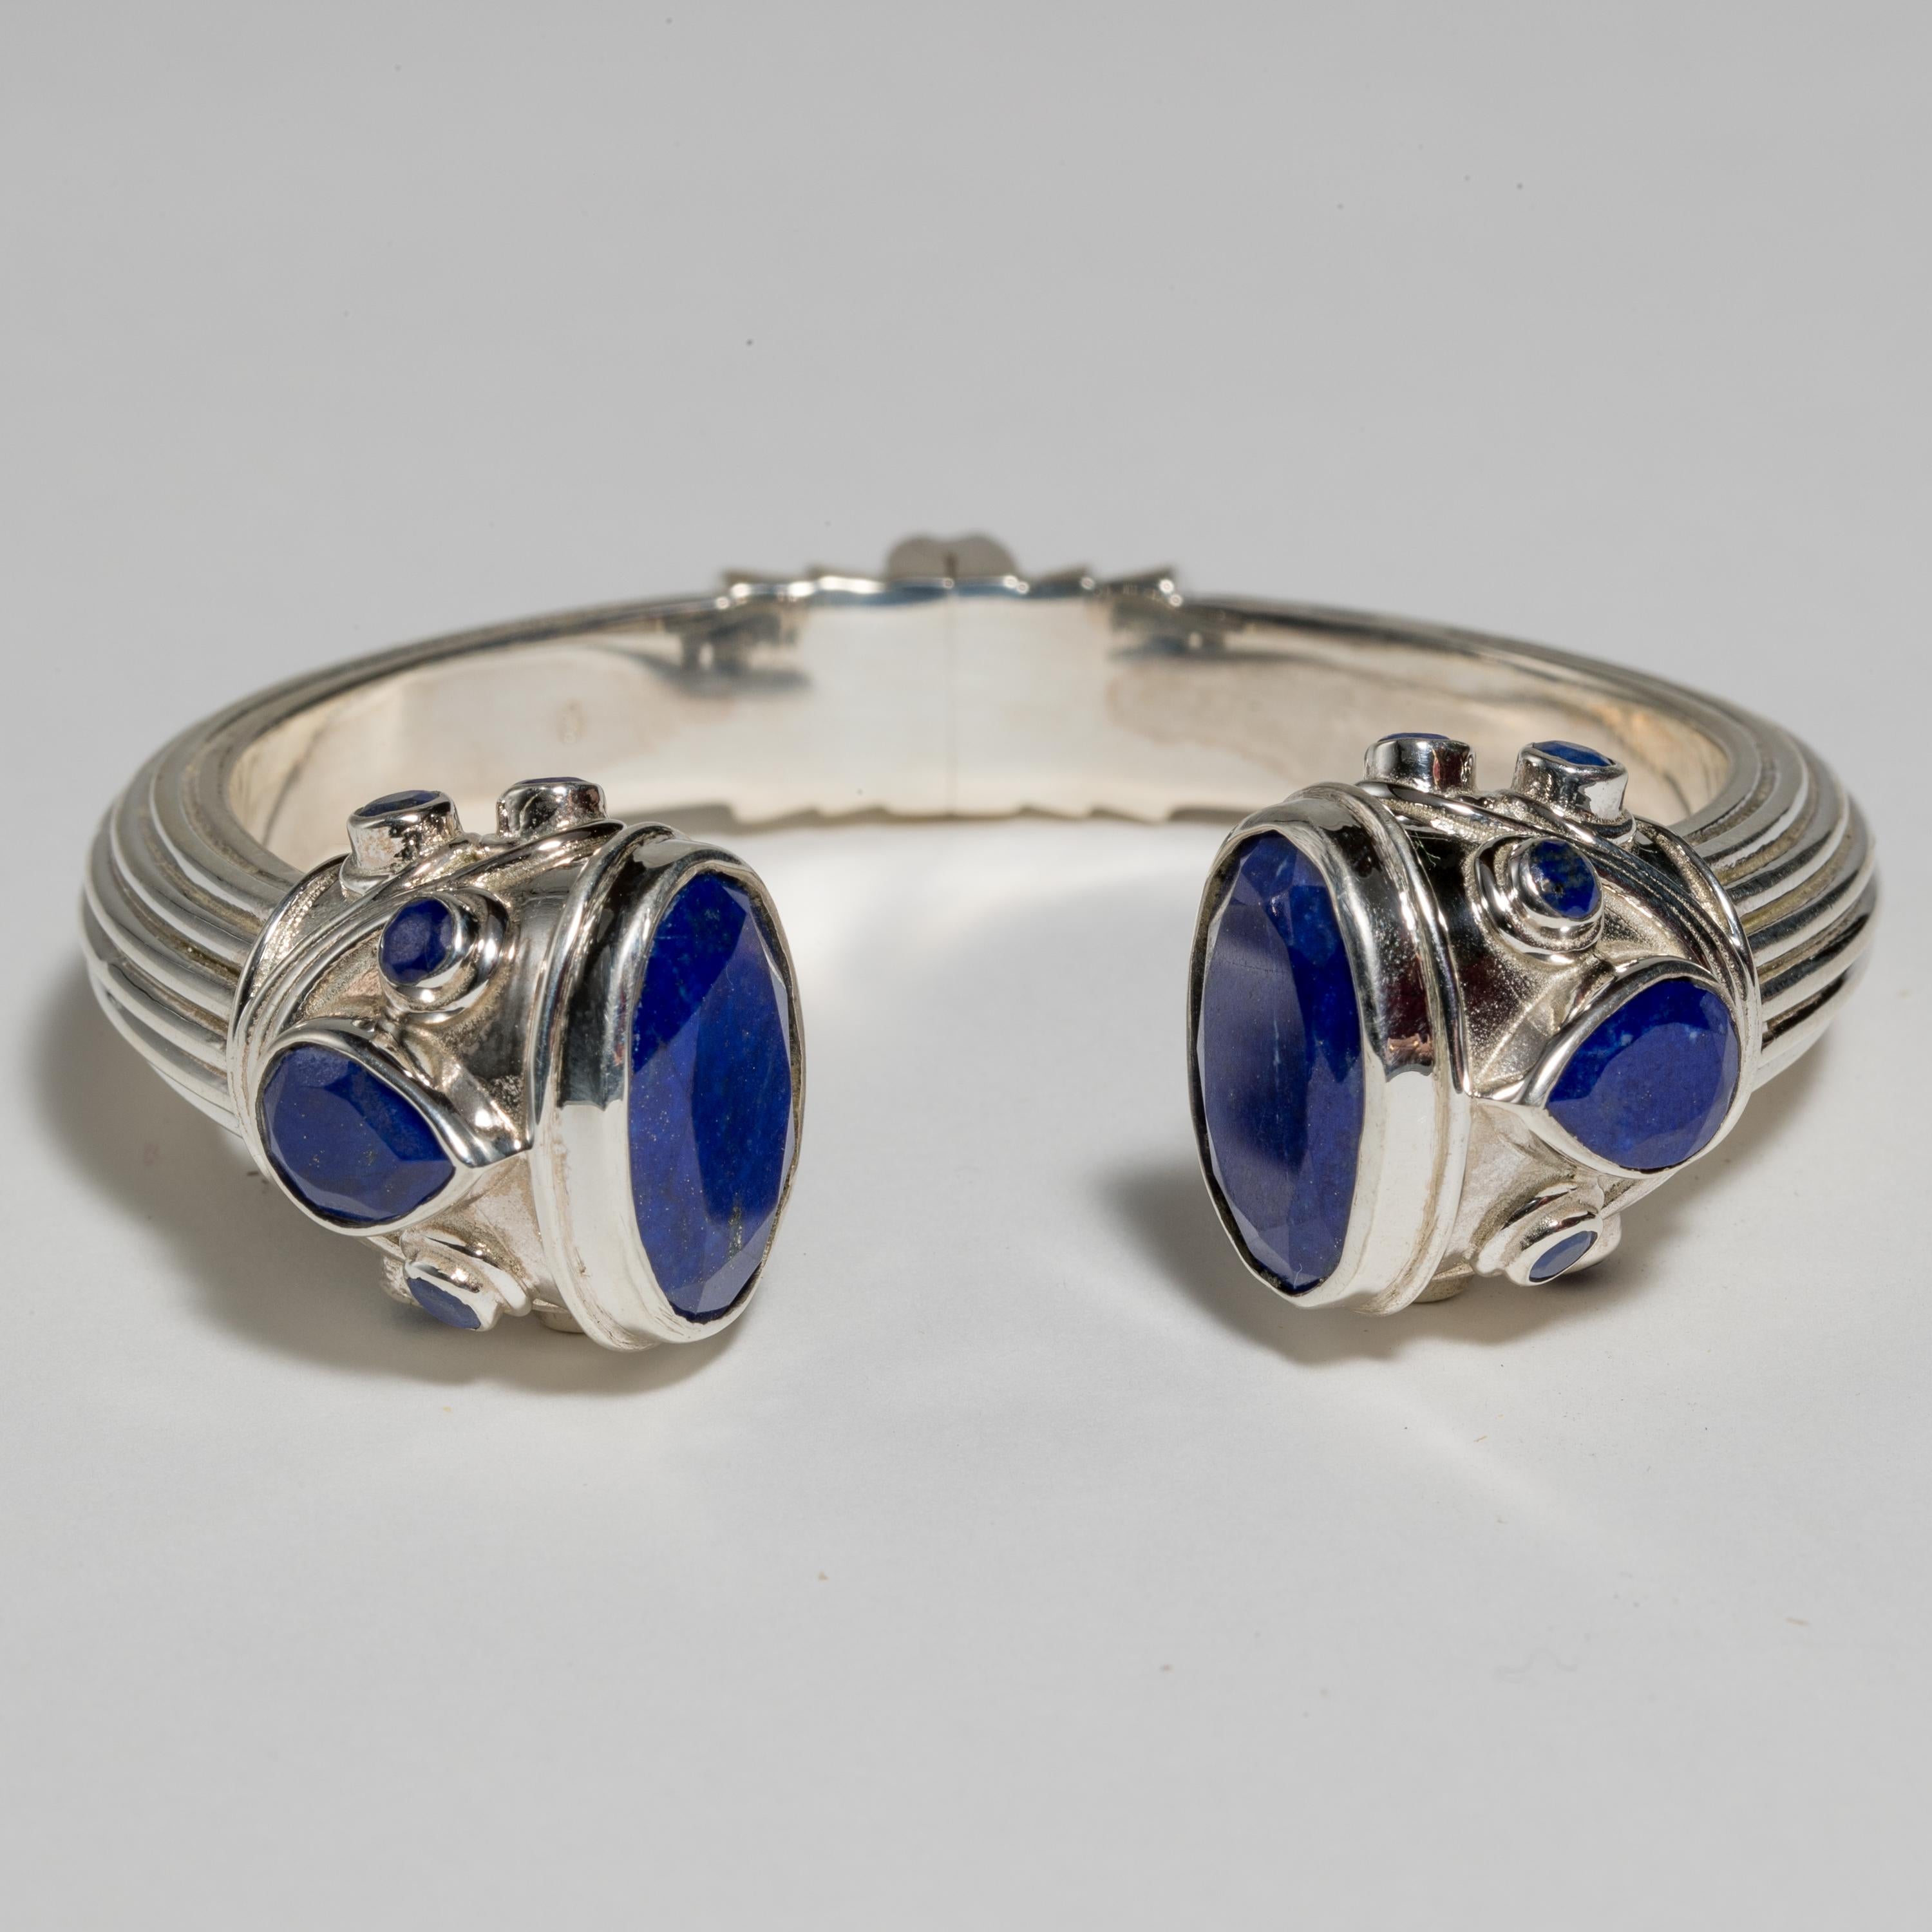 A hinged cuff clamper bracelet with textured sterling silver sides and faceted lapis lazuli pear-shaped and round stones on top of the bracelet and large faceted oval lapis on top inside. Natural lapis with beautiful peacock blue color.  The inside